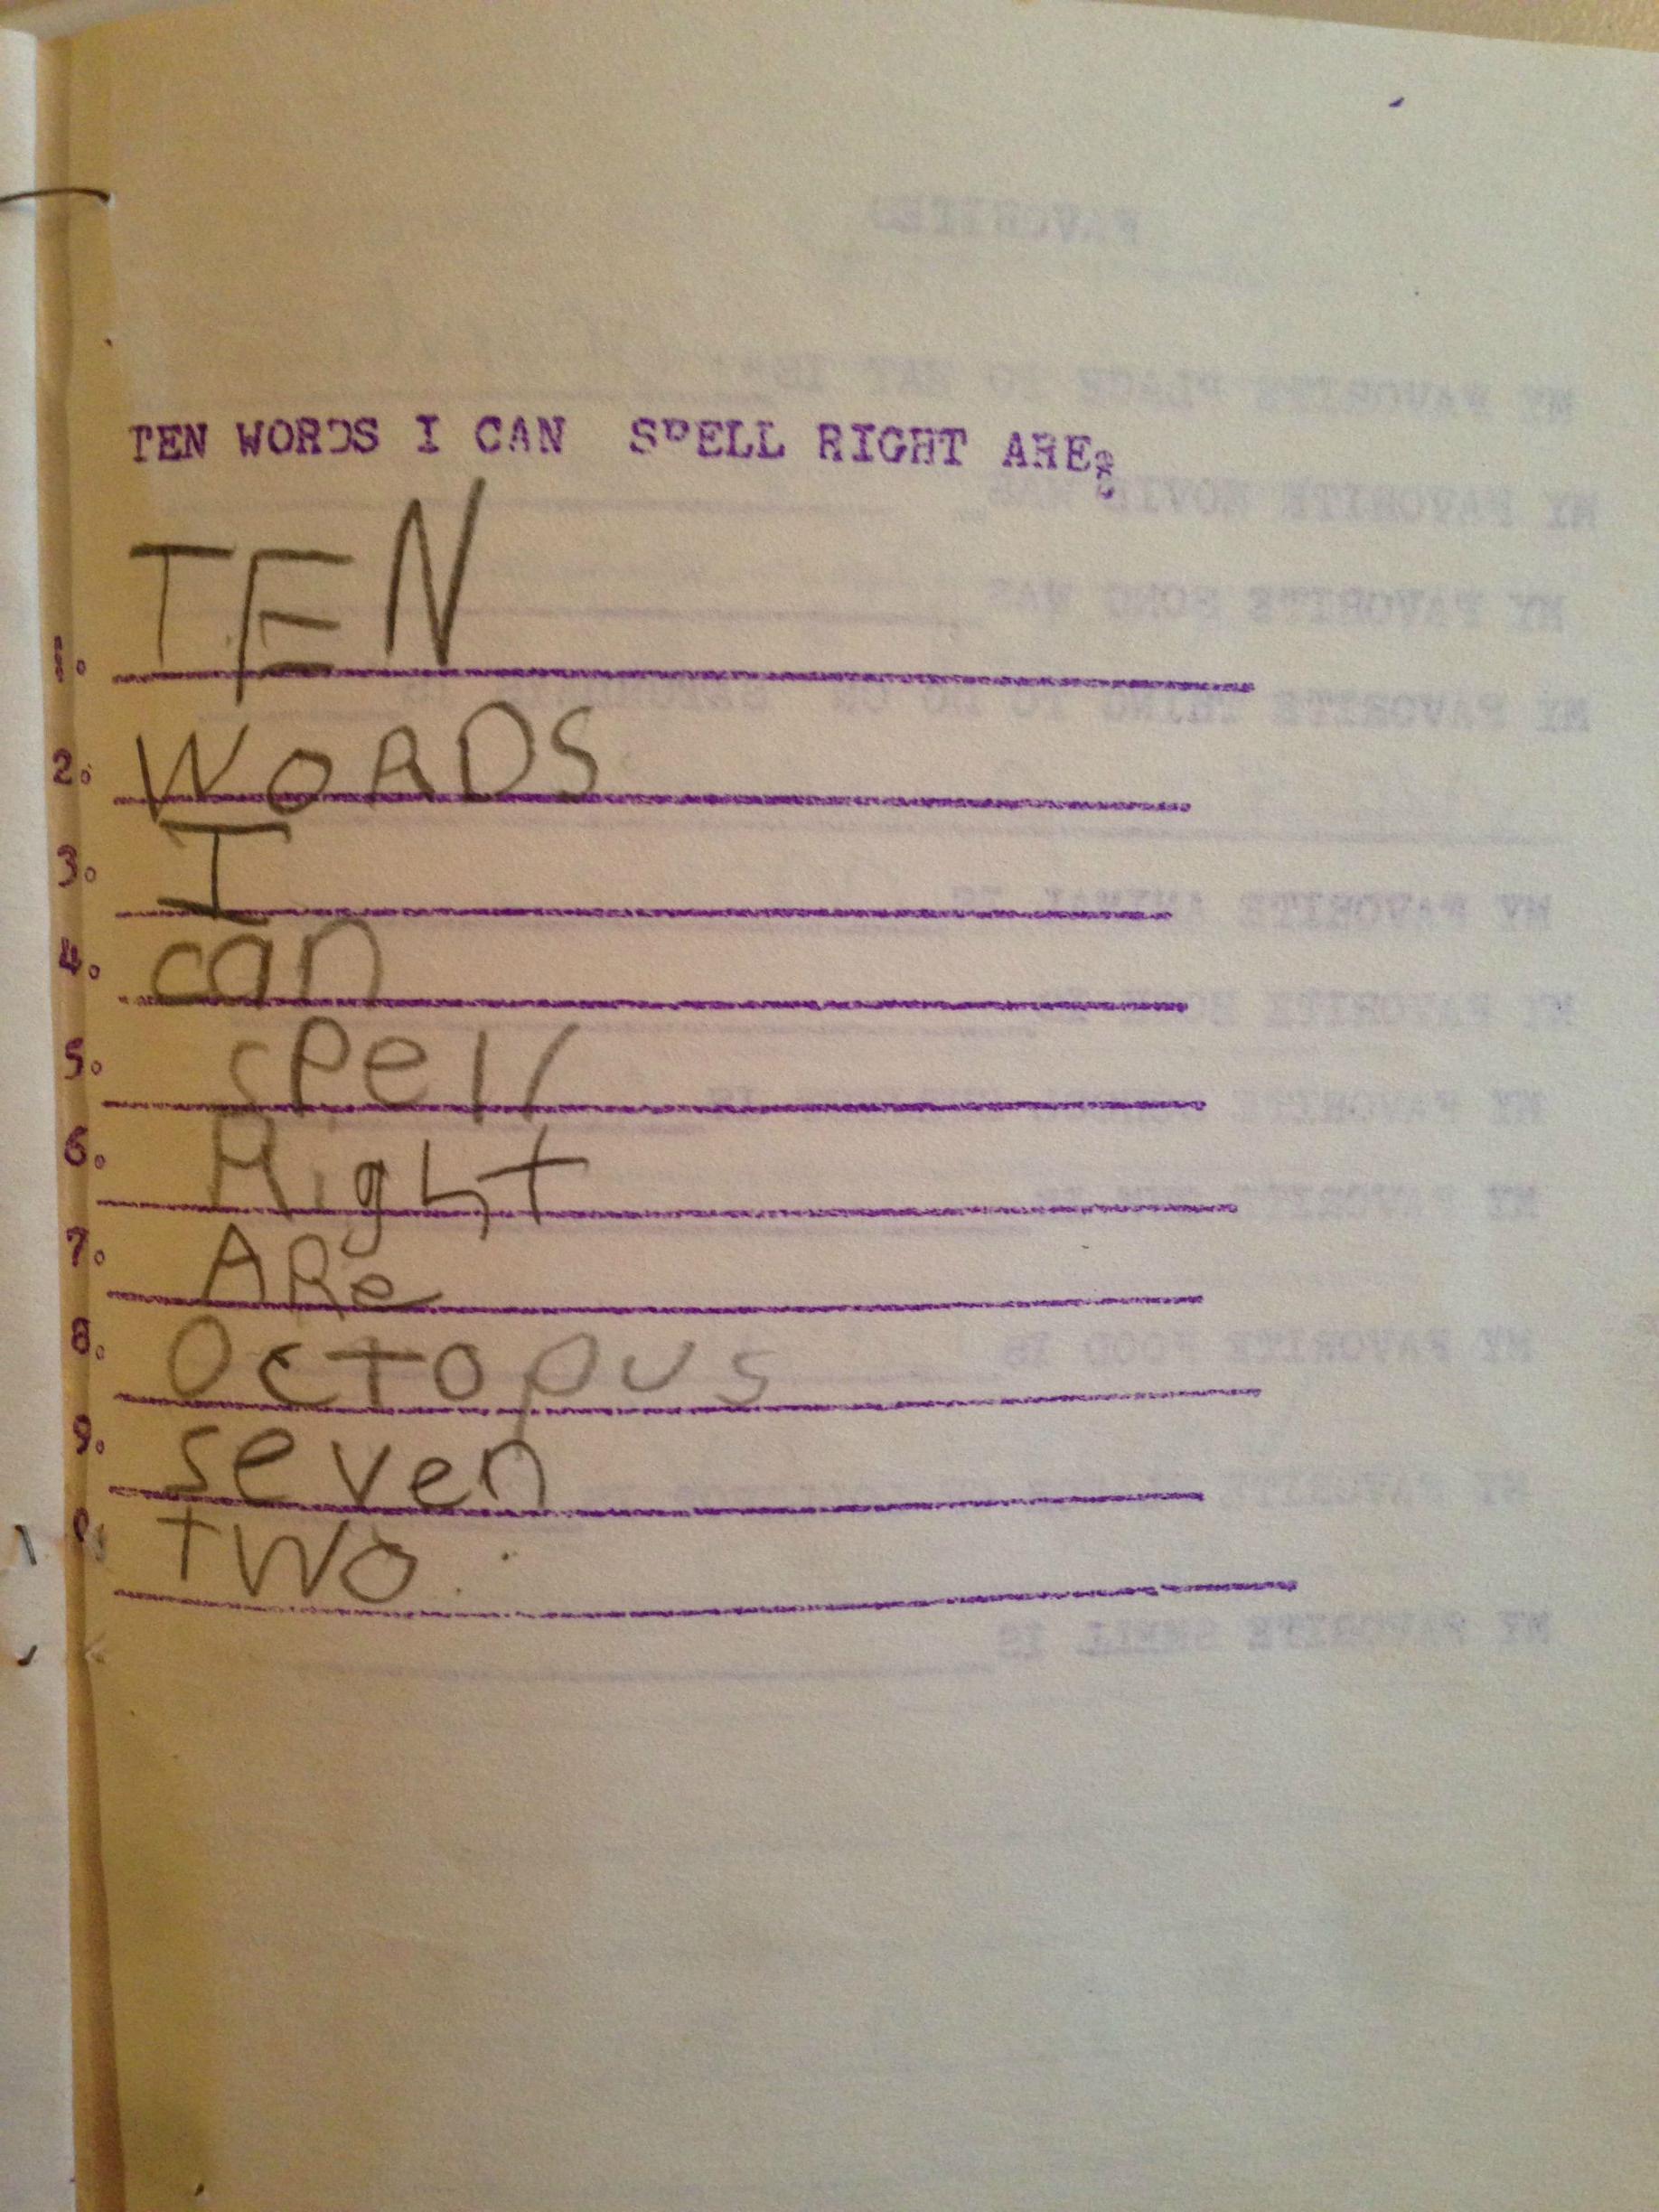 Found this in some old school papers. Apparently even 7 year old me was a smart ass.